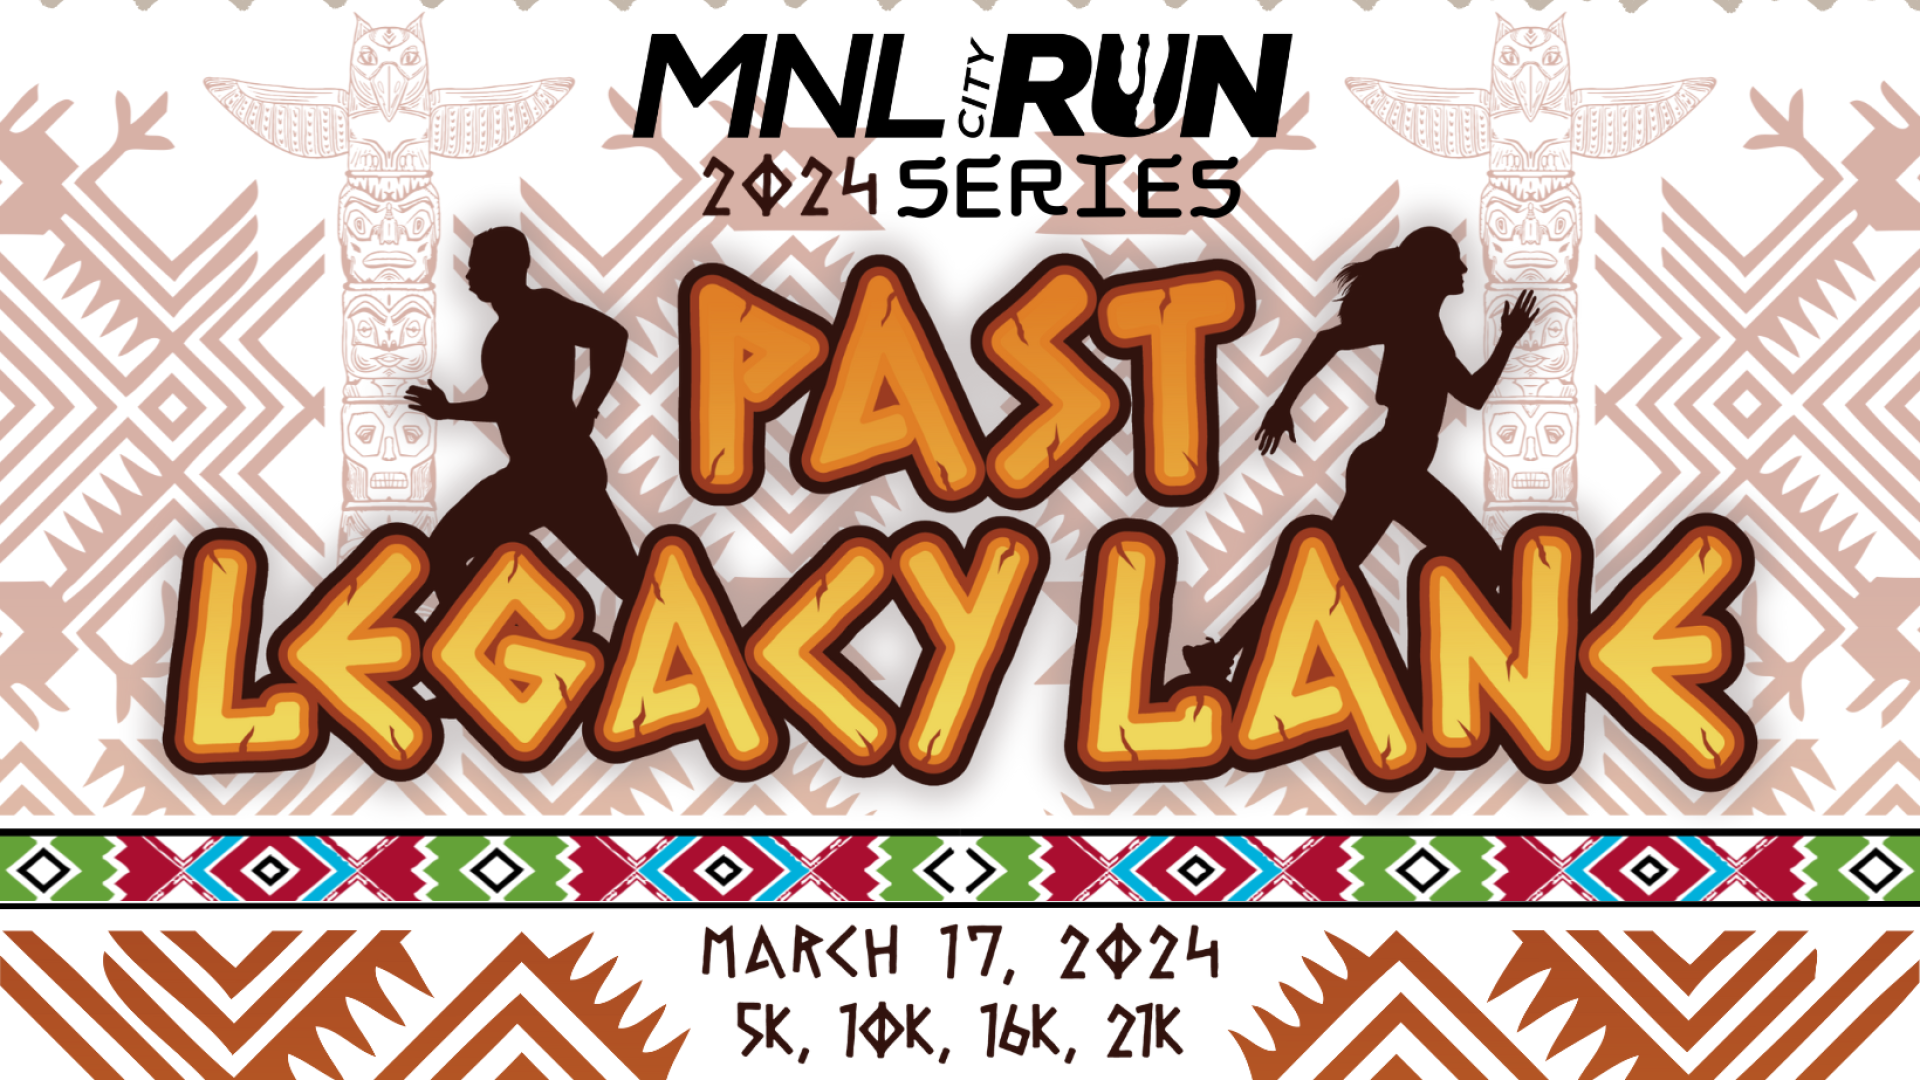 MNL City Run 2024 Series Leg 1 Details, Options for Personalized Race